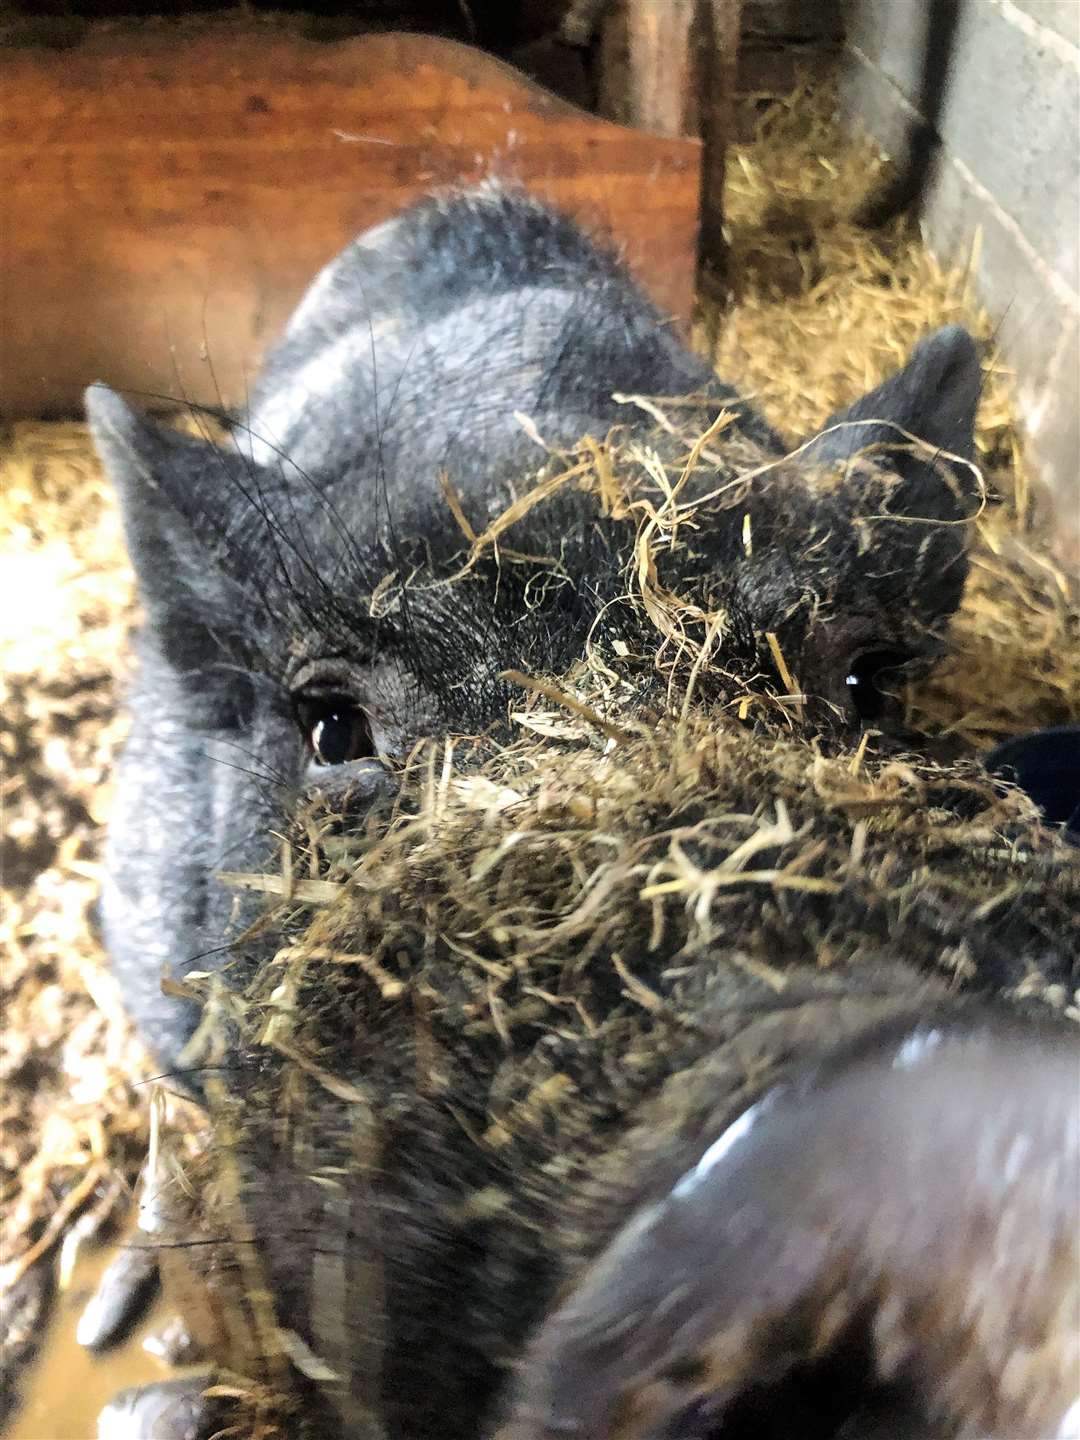 Mr Bingley is a pot belly boar of 15 years who was rescued from Bingley Forest in Yorkshire. All the pigs at Puffin Croft were found to be in a healthy condition by SSPCA inspectors. Pictures: Puffin Croft